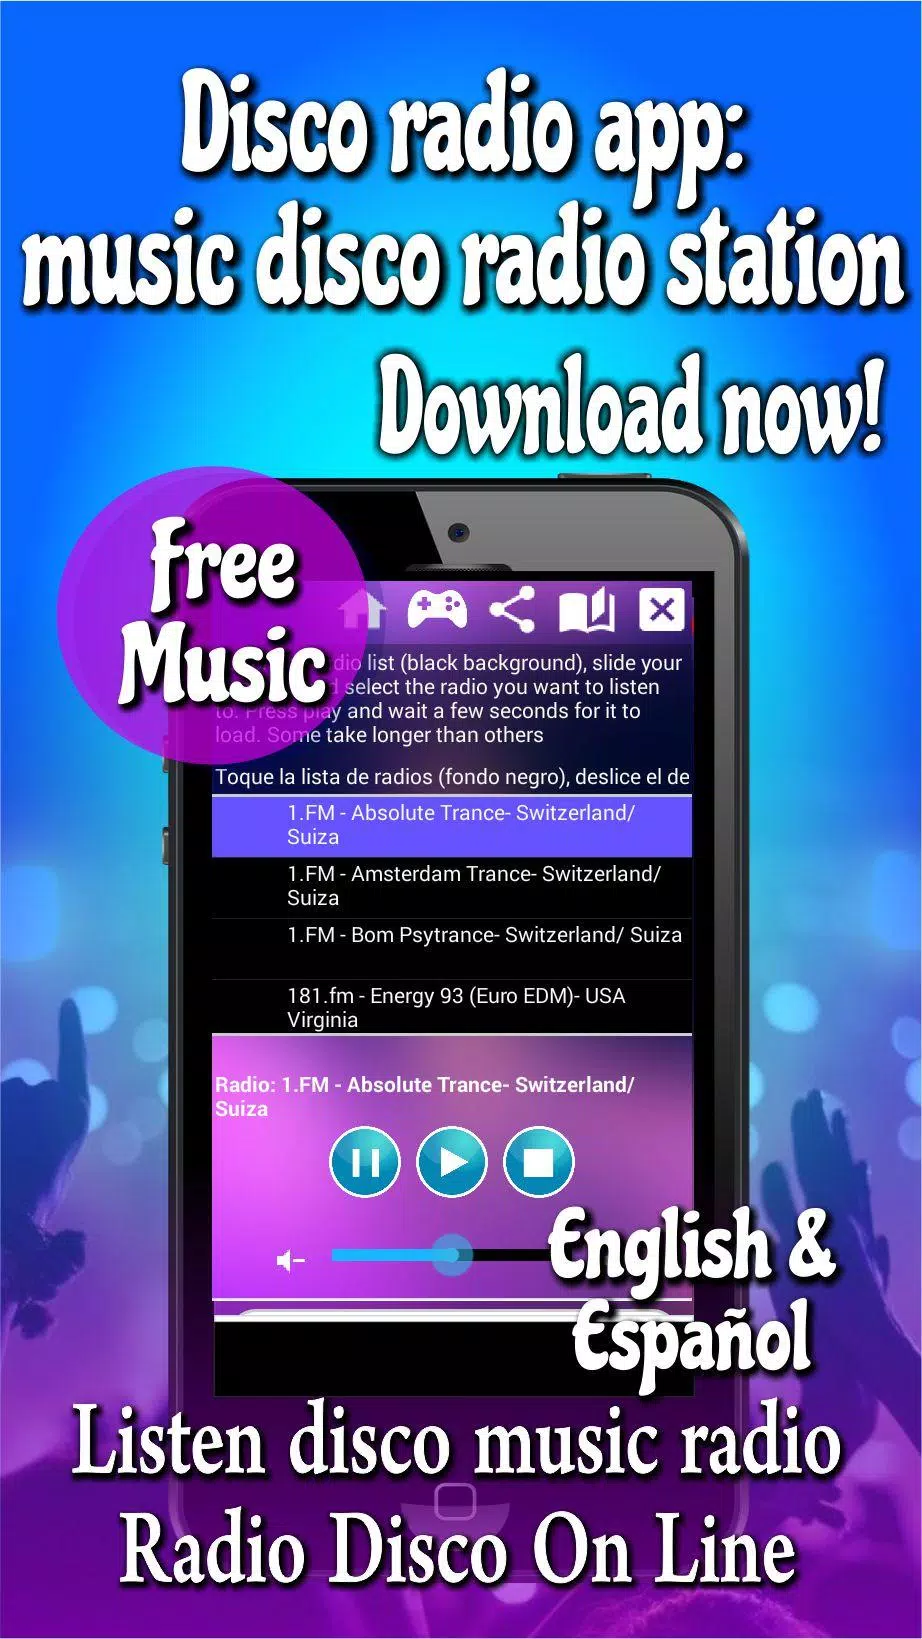 Disco radio app: music disco APK for Android Download